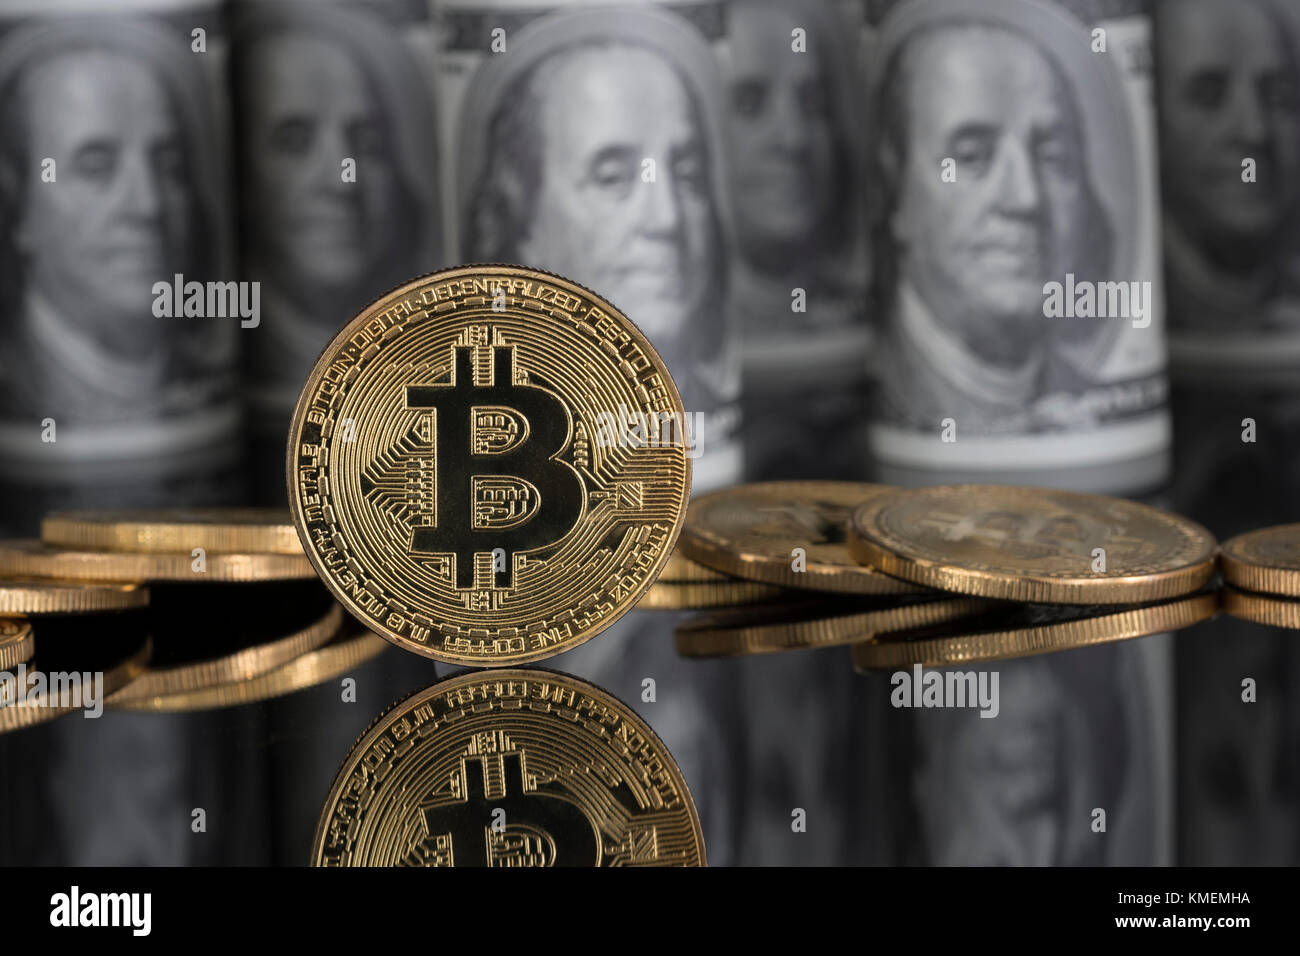 Gold-colored Bitcoin cryptocurrency with US $100 Franklin bills - Bitcoin values reaching high levels in December 2017. Franklin C notes. Stock Photo